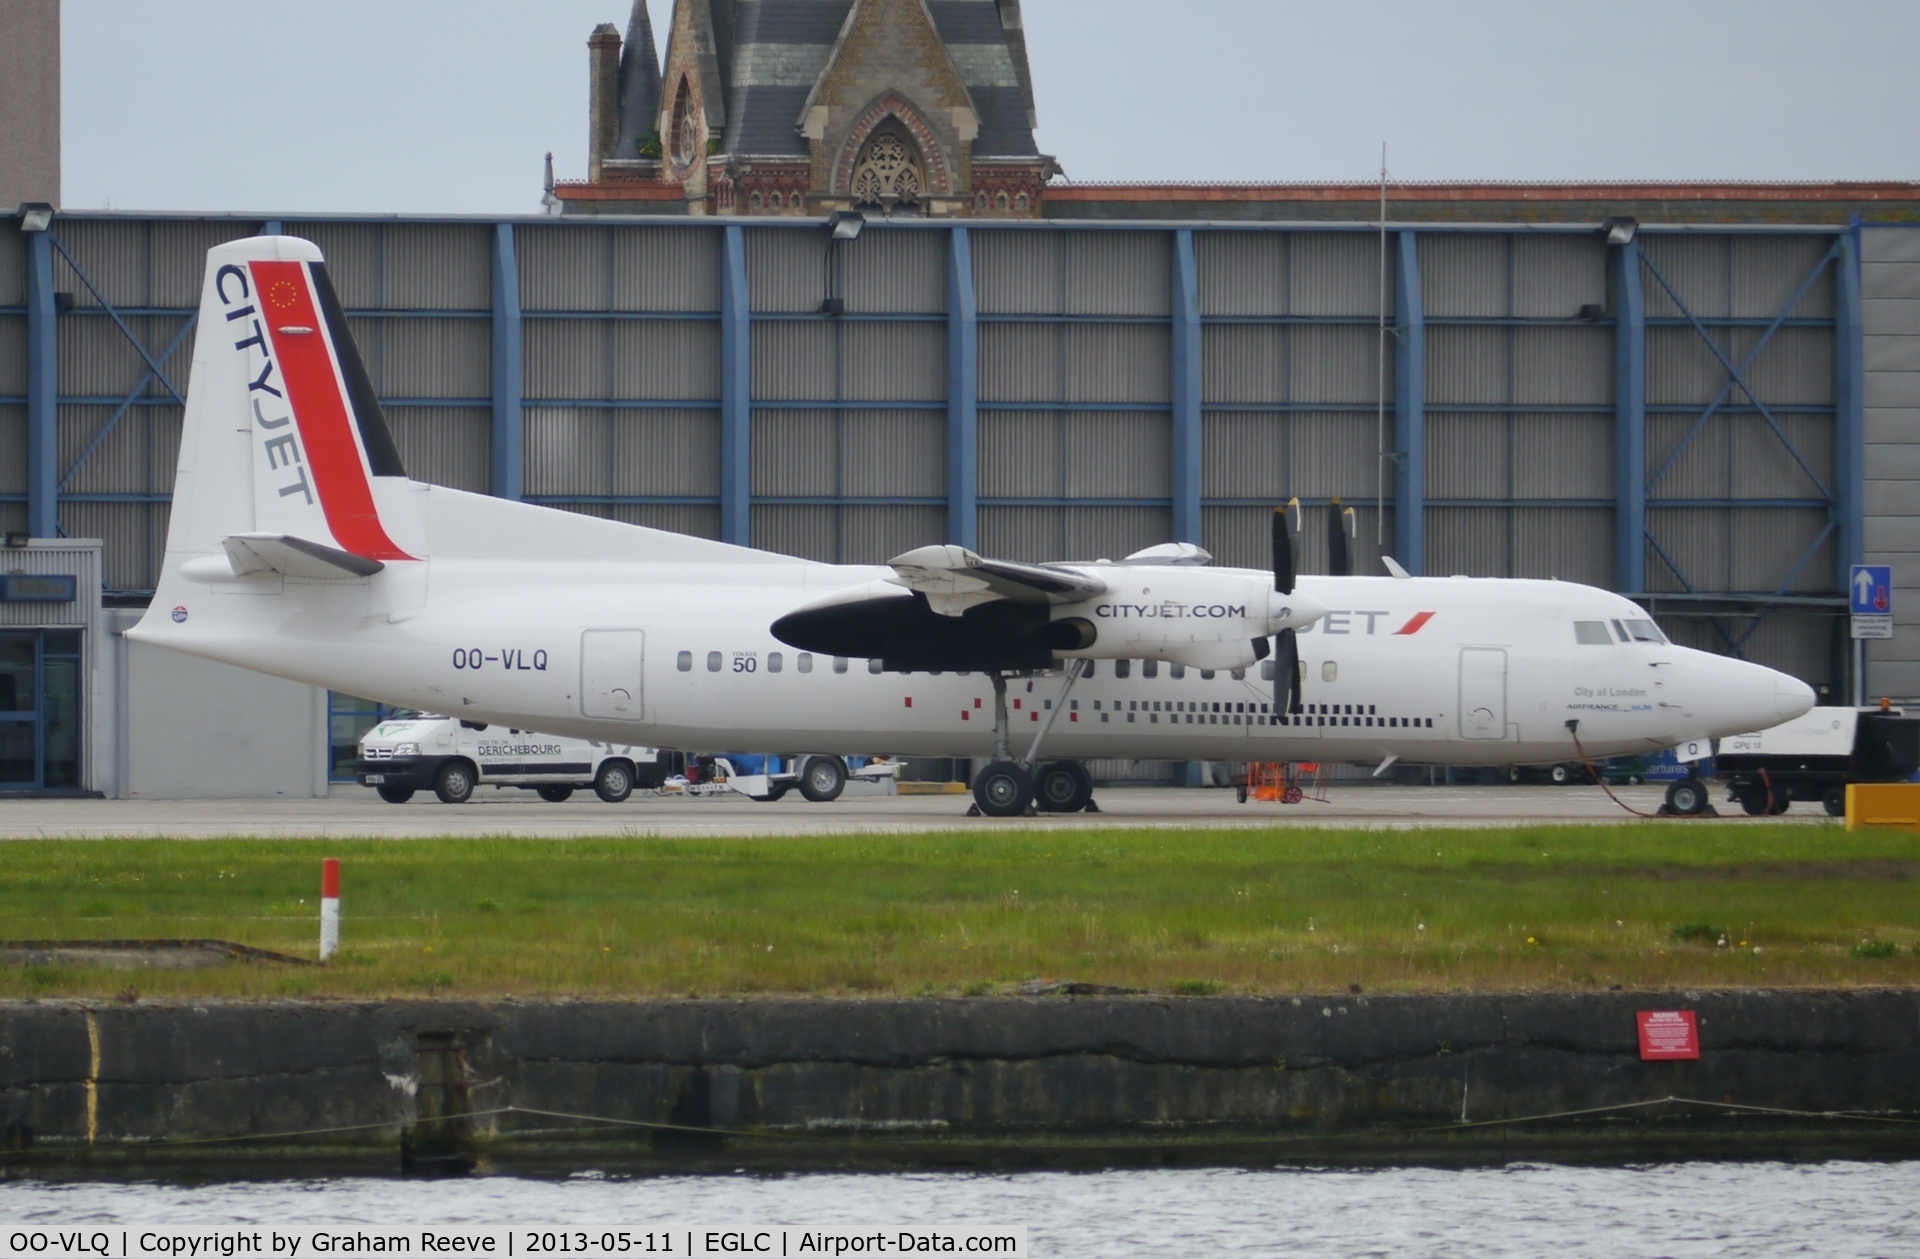 OO-VLQ, 1989 Fokker 50 C/N 20159, Parked at London City airport.